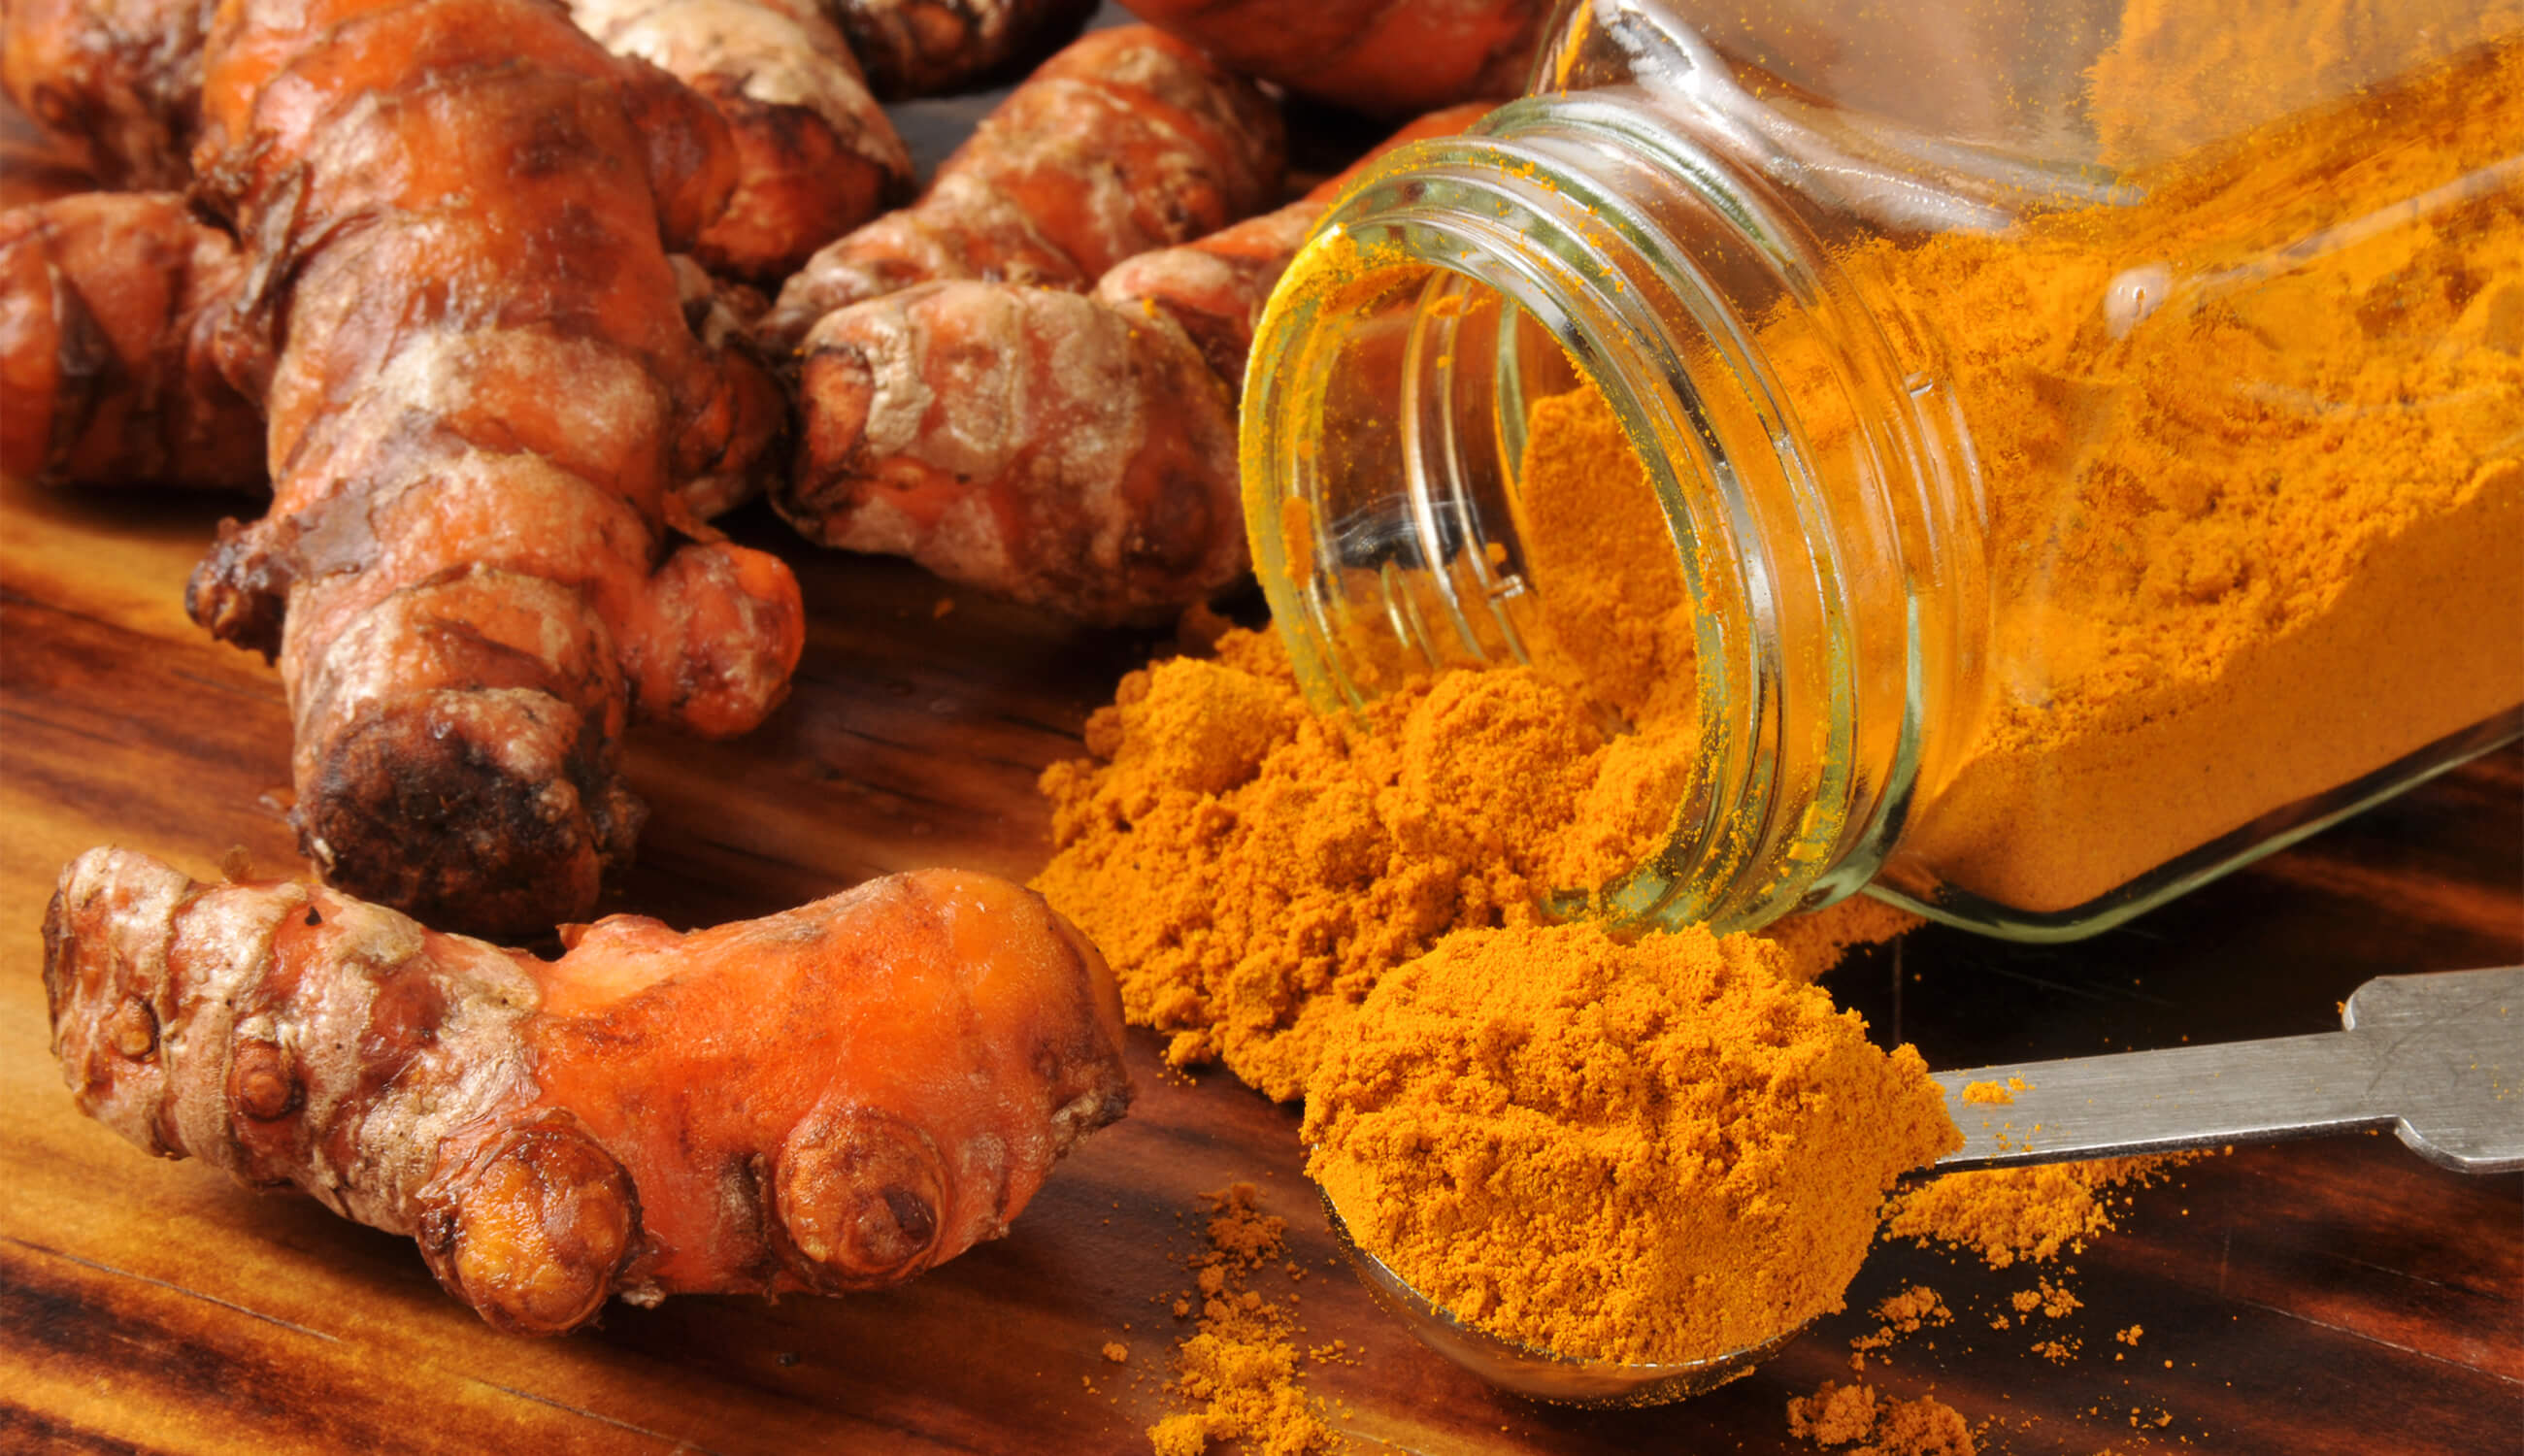 Turmeric powder - calms inflammation, brightens, reduces acne scarring